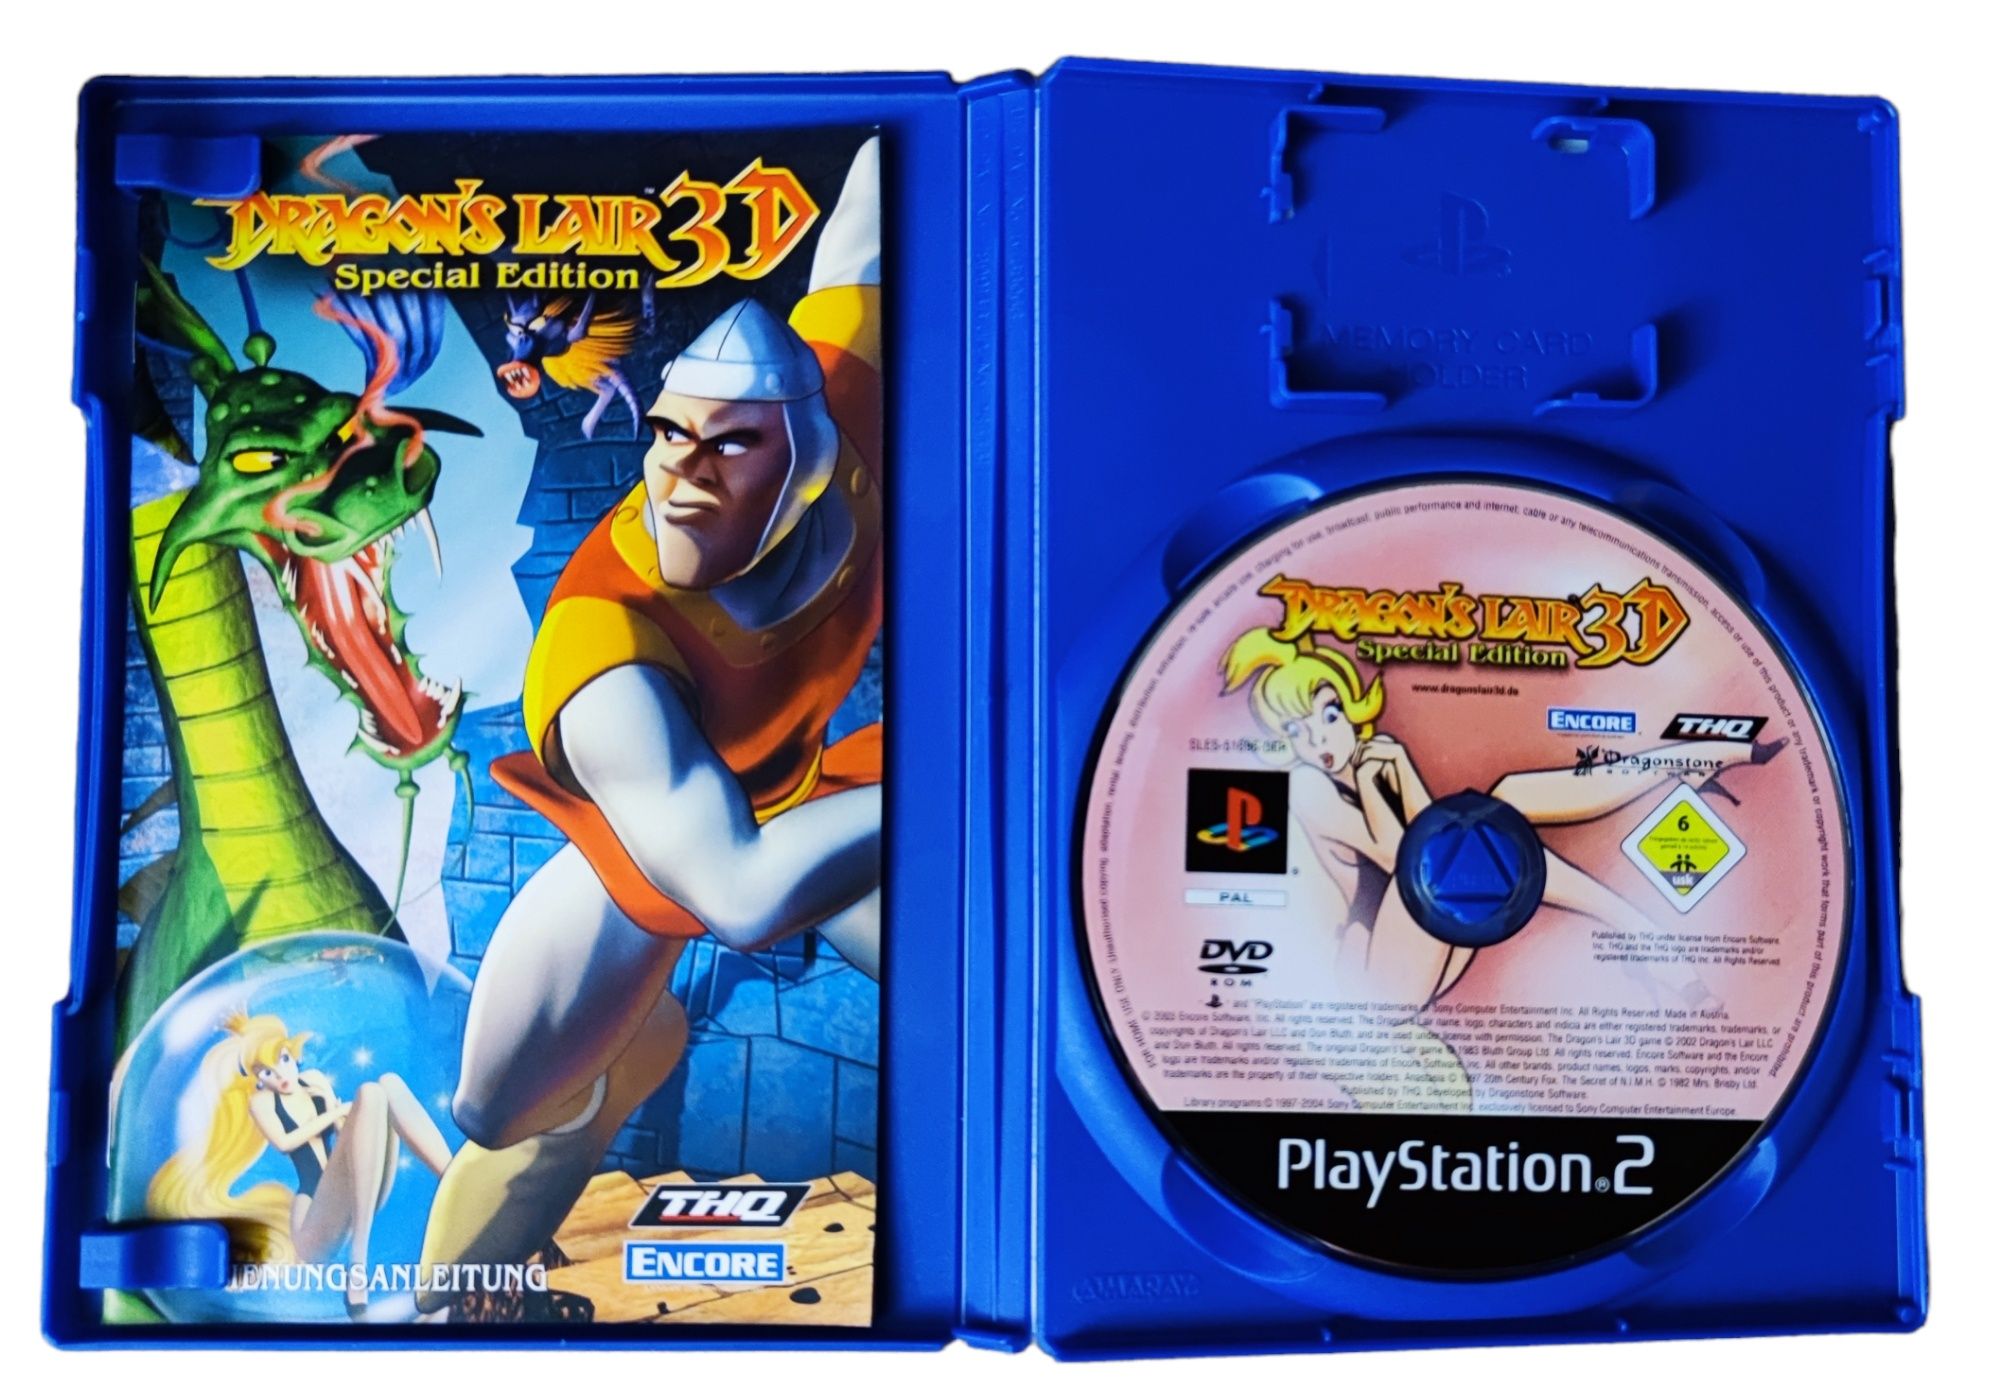 Dragon's Lair 3D: Special Edition PlayStation 2